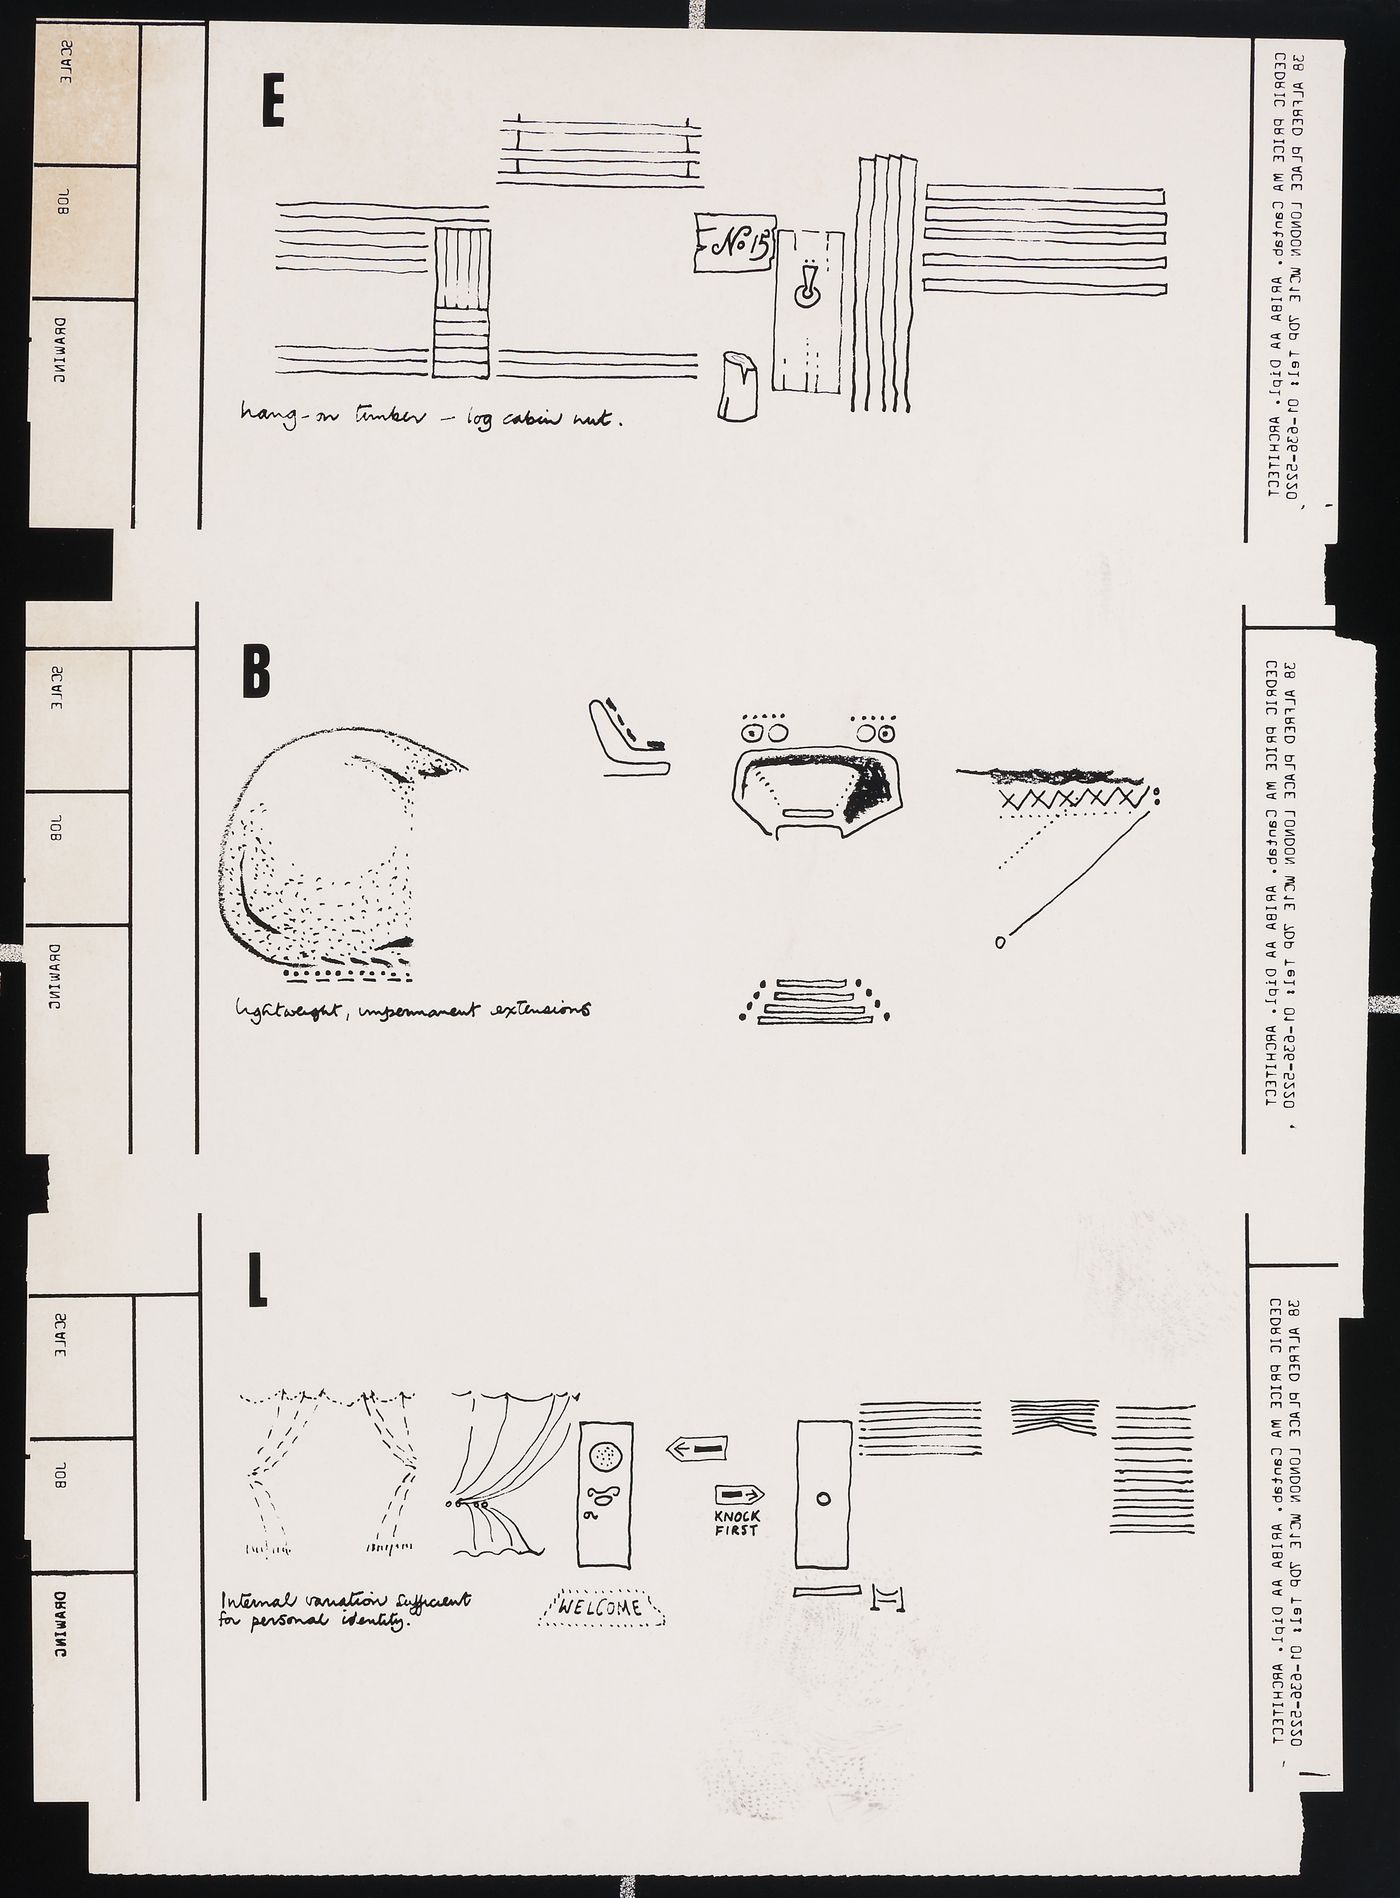 Housing Research: sketches of variations and extensions for a prefabricated house